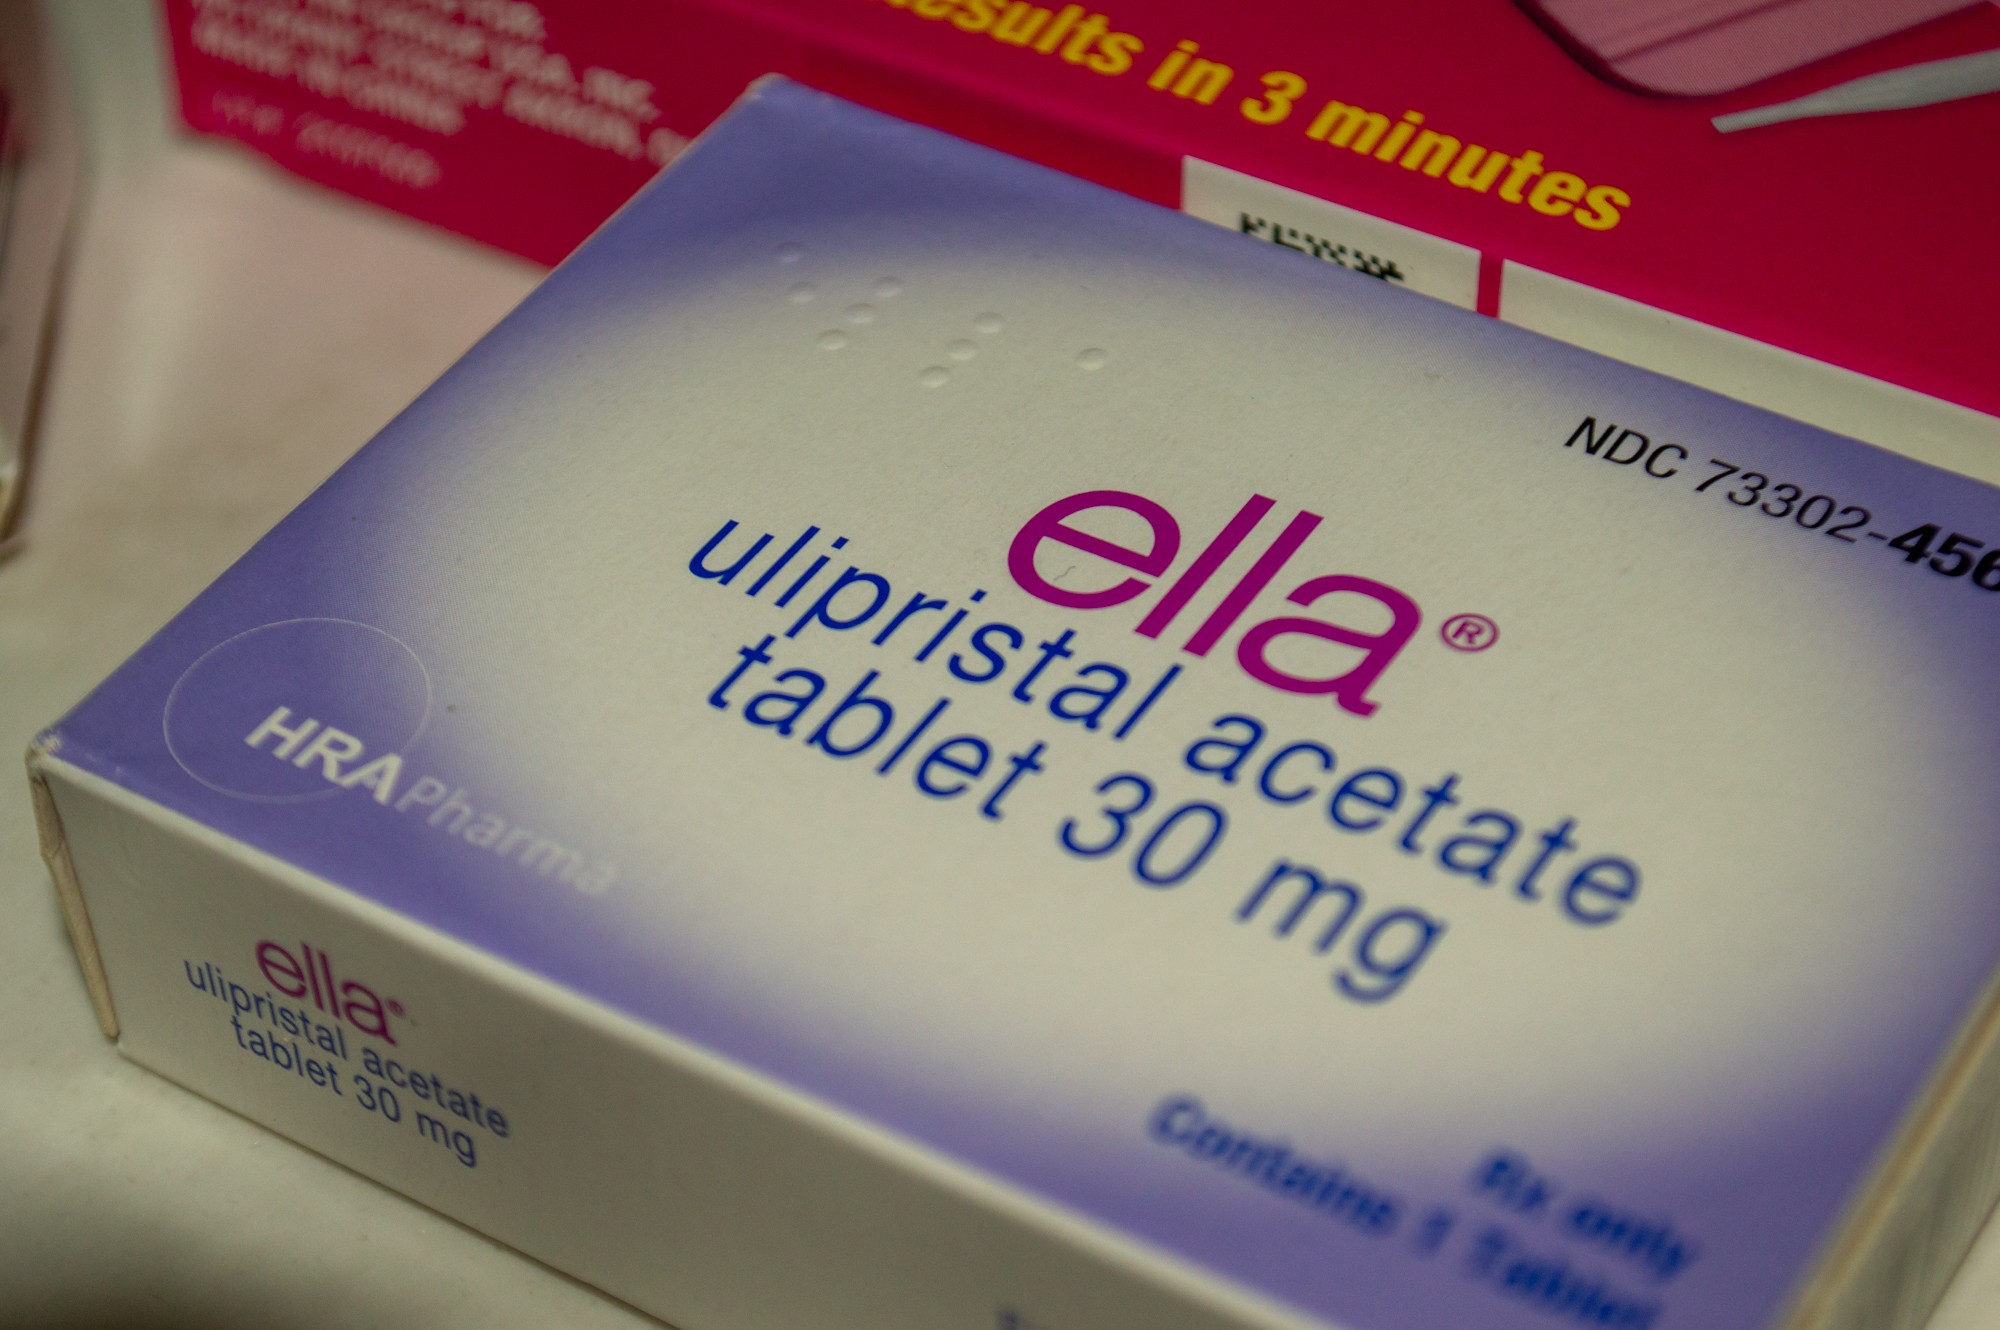 A purple box of Ella, an emergency contraceptive pill, sits on a table.